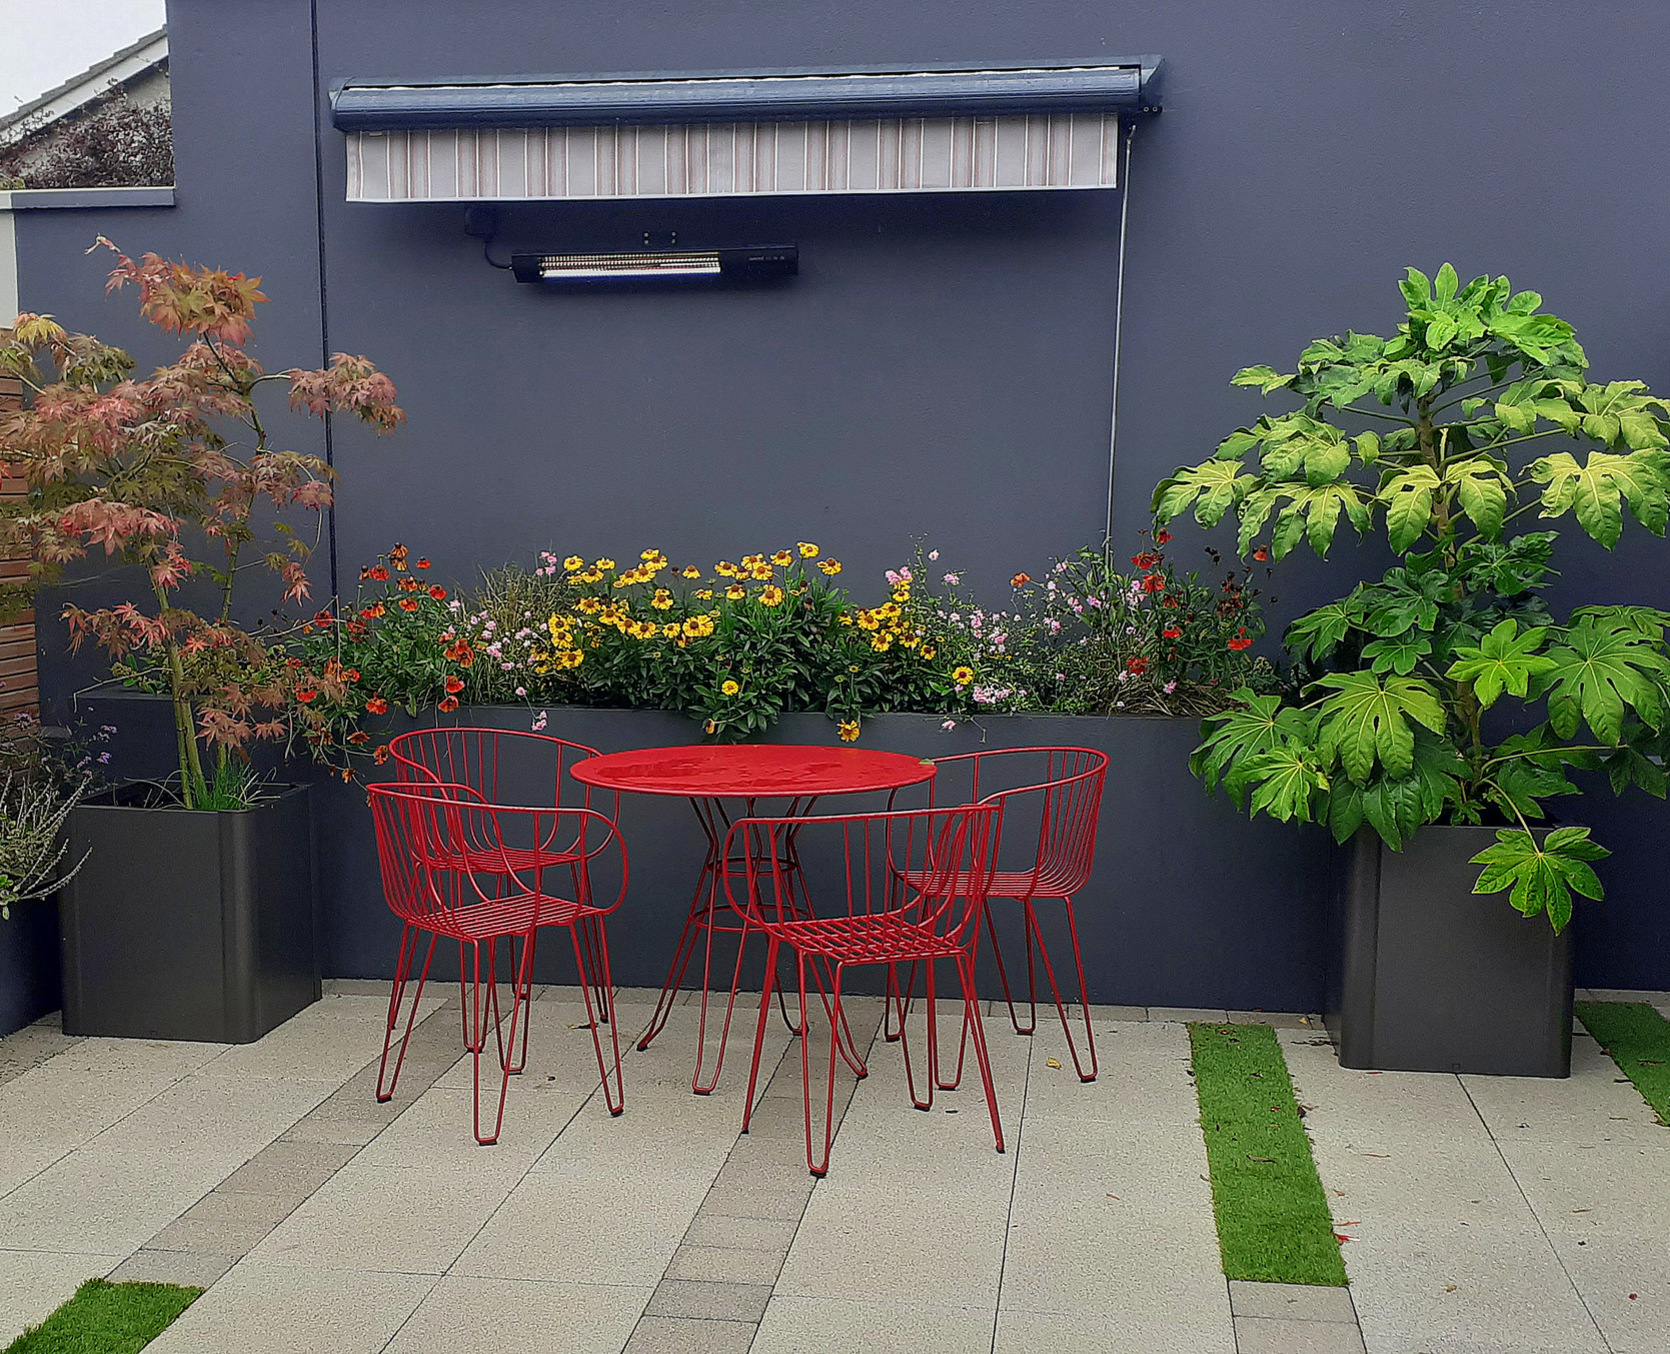 Planting Ideas for small spaces, to create colour, impact and stimulation | Dundrum, Dublin 18